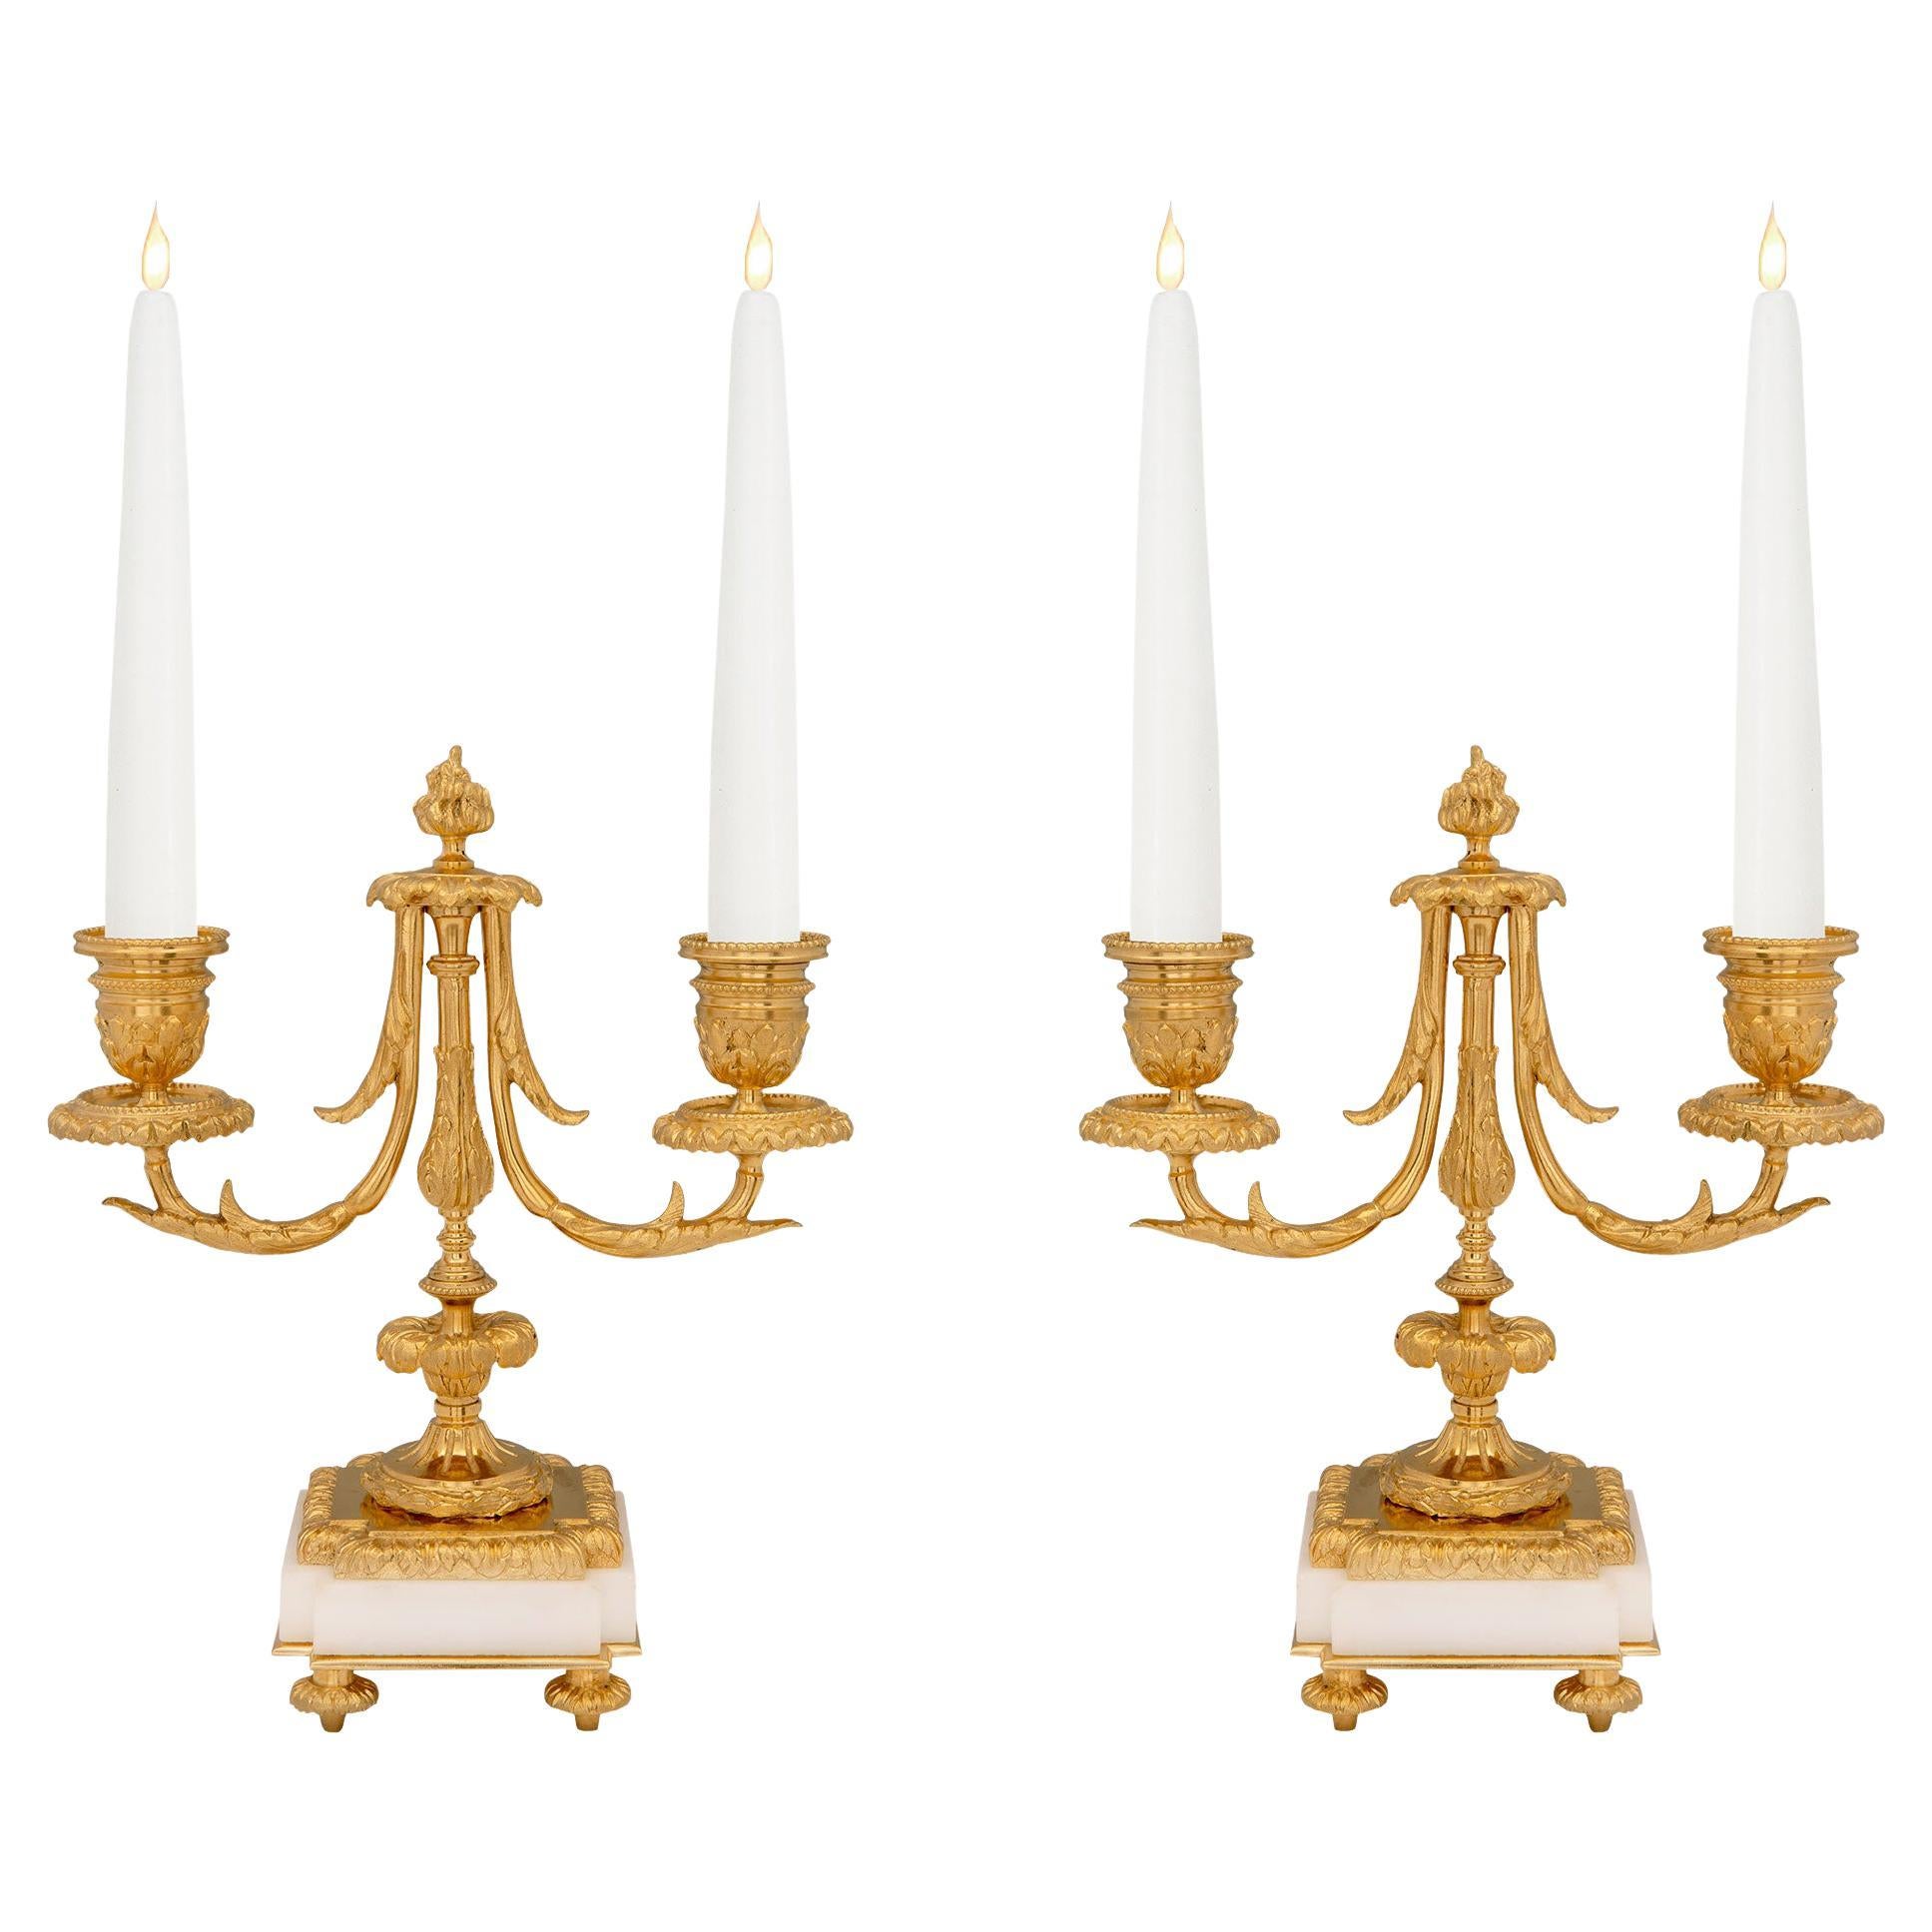 French 19th Century Louis XVI Style Marble and Ormolu Two-Arm Candelabras